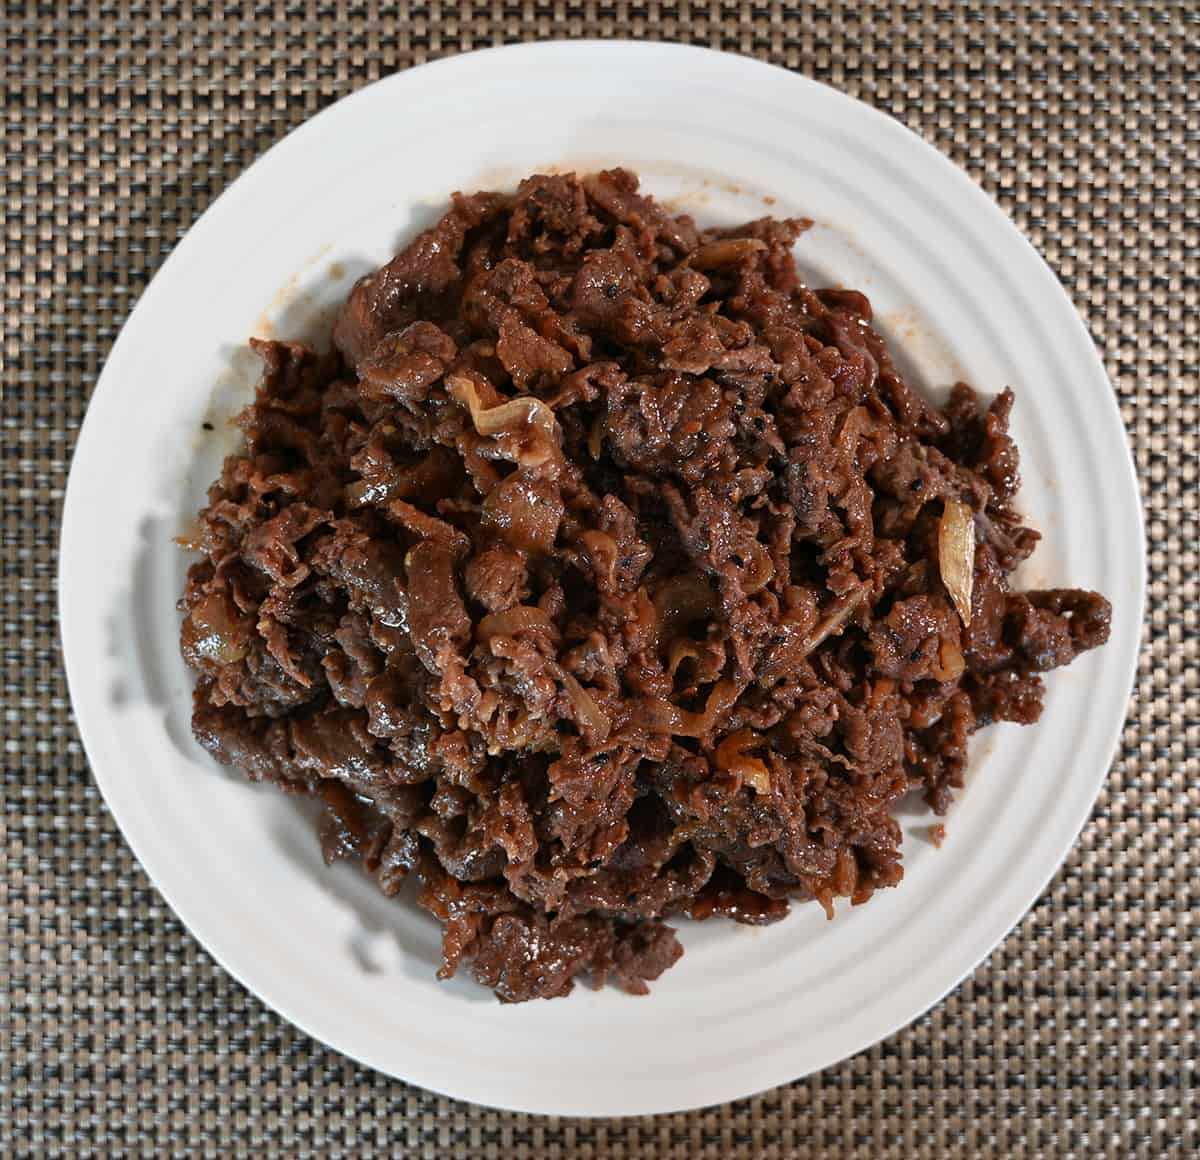 Top down image of a full plate of cooked beef bulgogi.